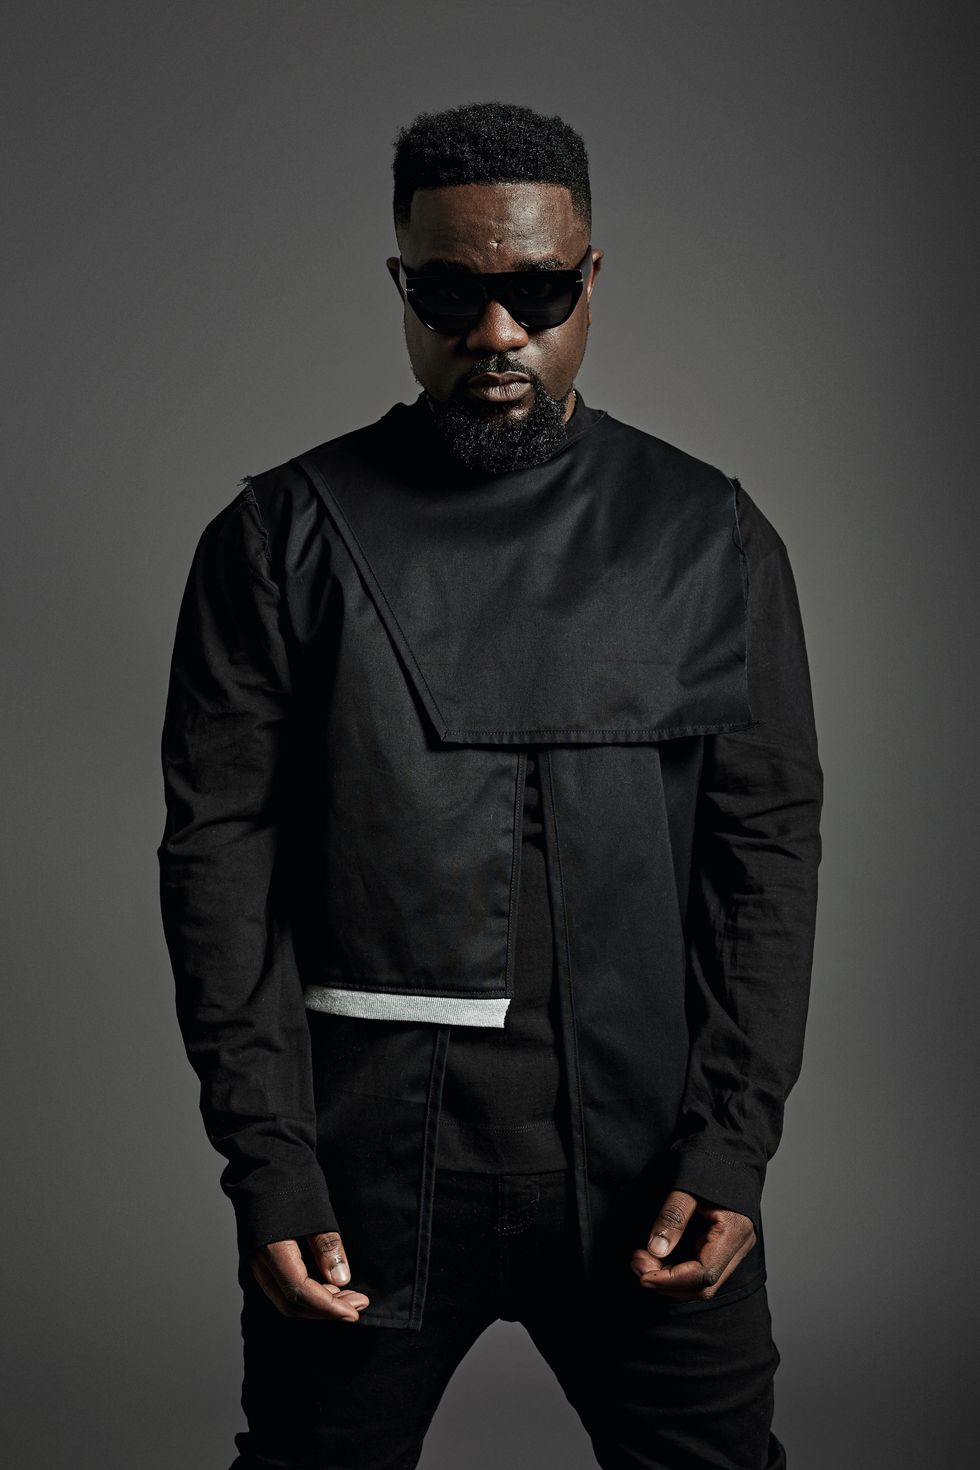 Interview: Sarkodie Is Going Global By Staying True to Ghana - Okayplayer